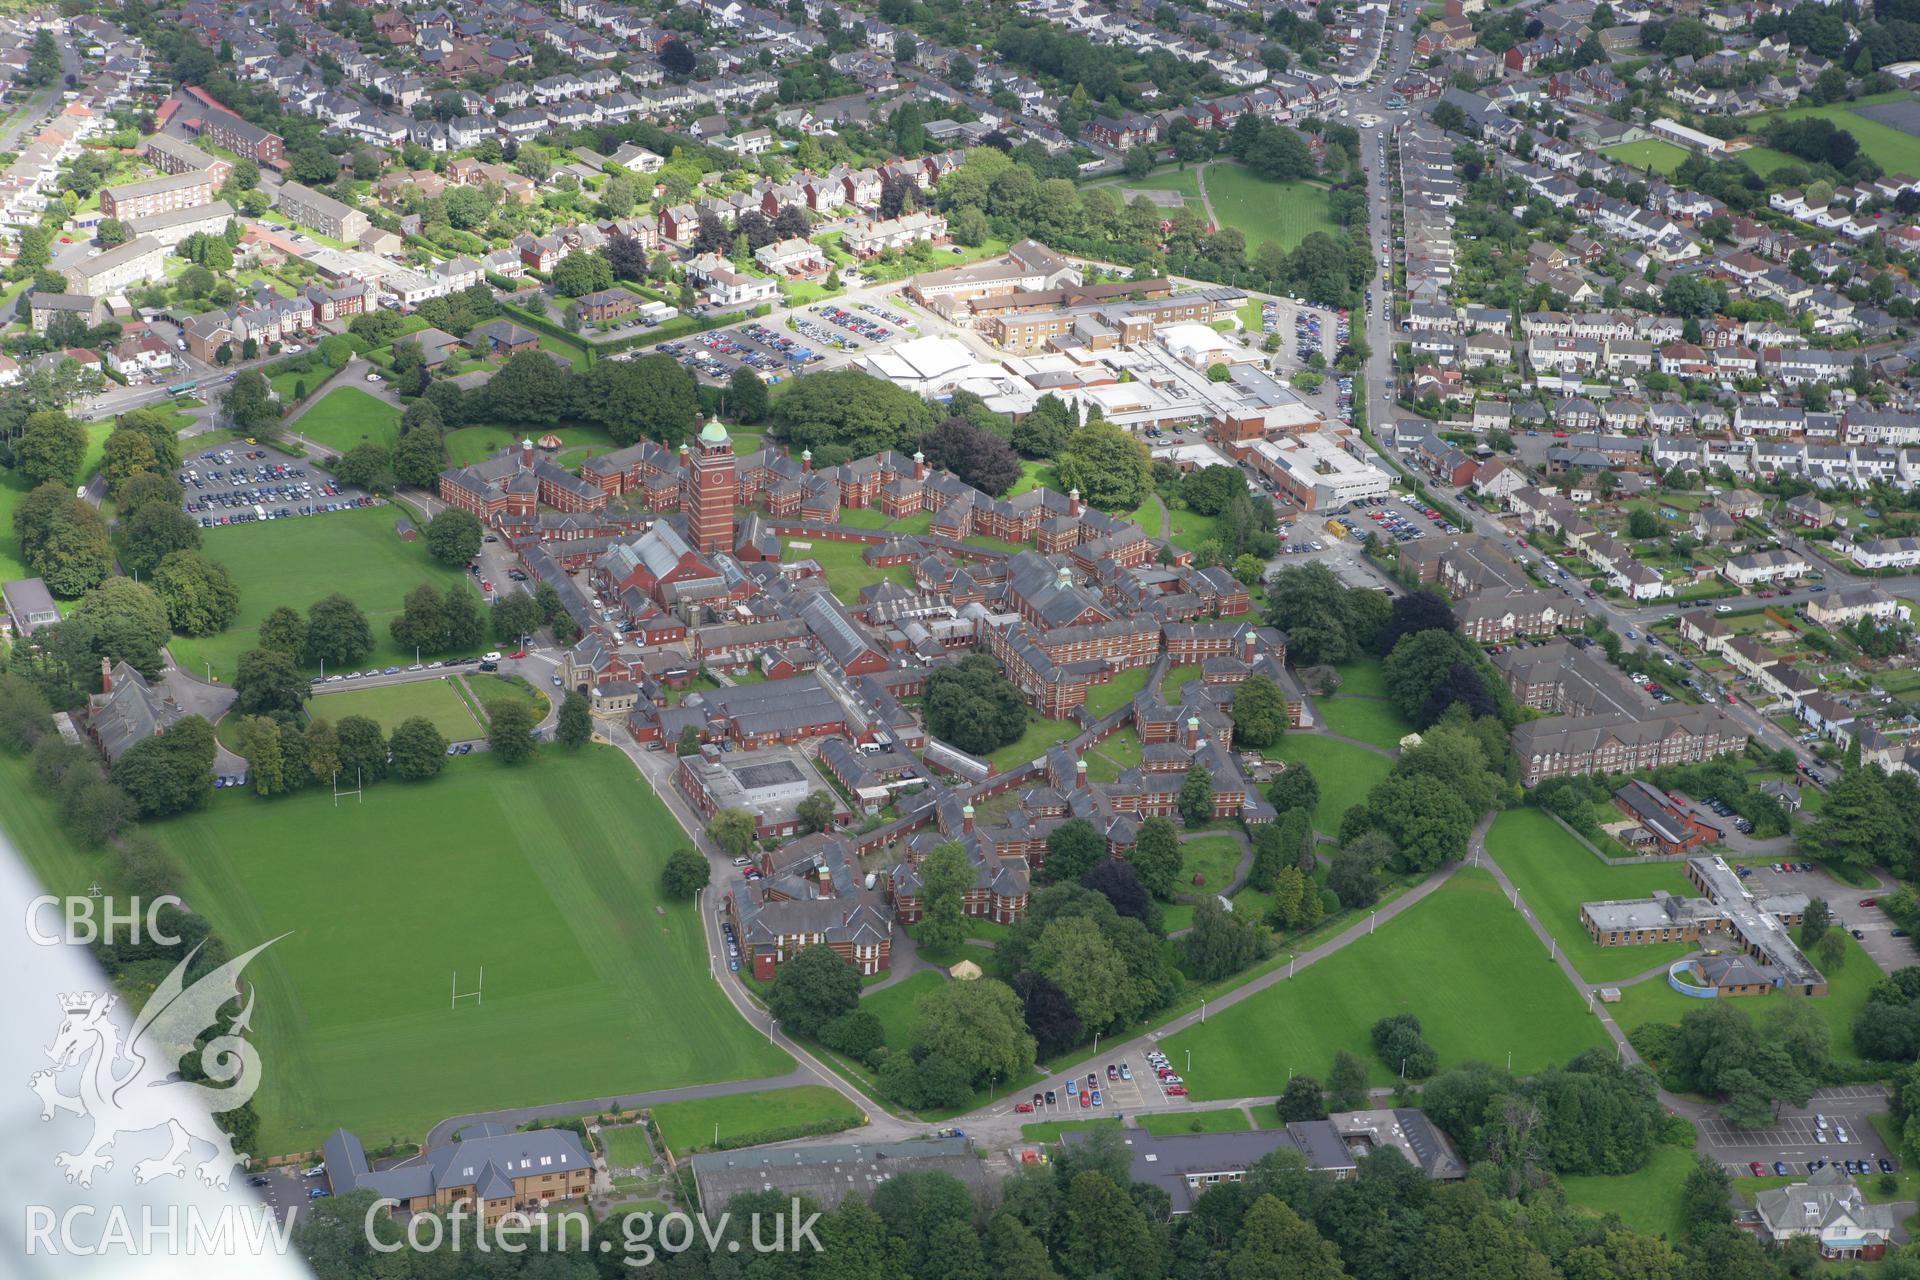 RCAHMW colour oblique aerial photograph of Whitchurch Hospital. Taken on 30 July 2007 by Toby Driver